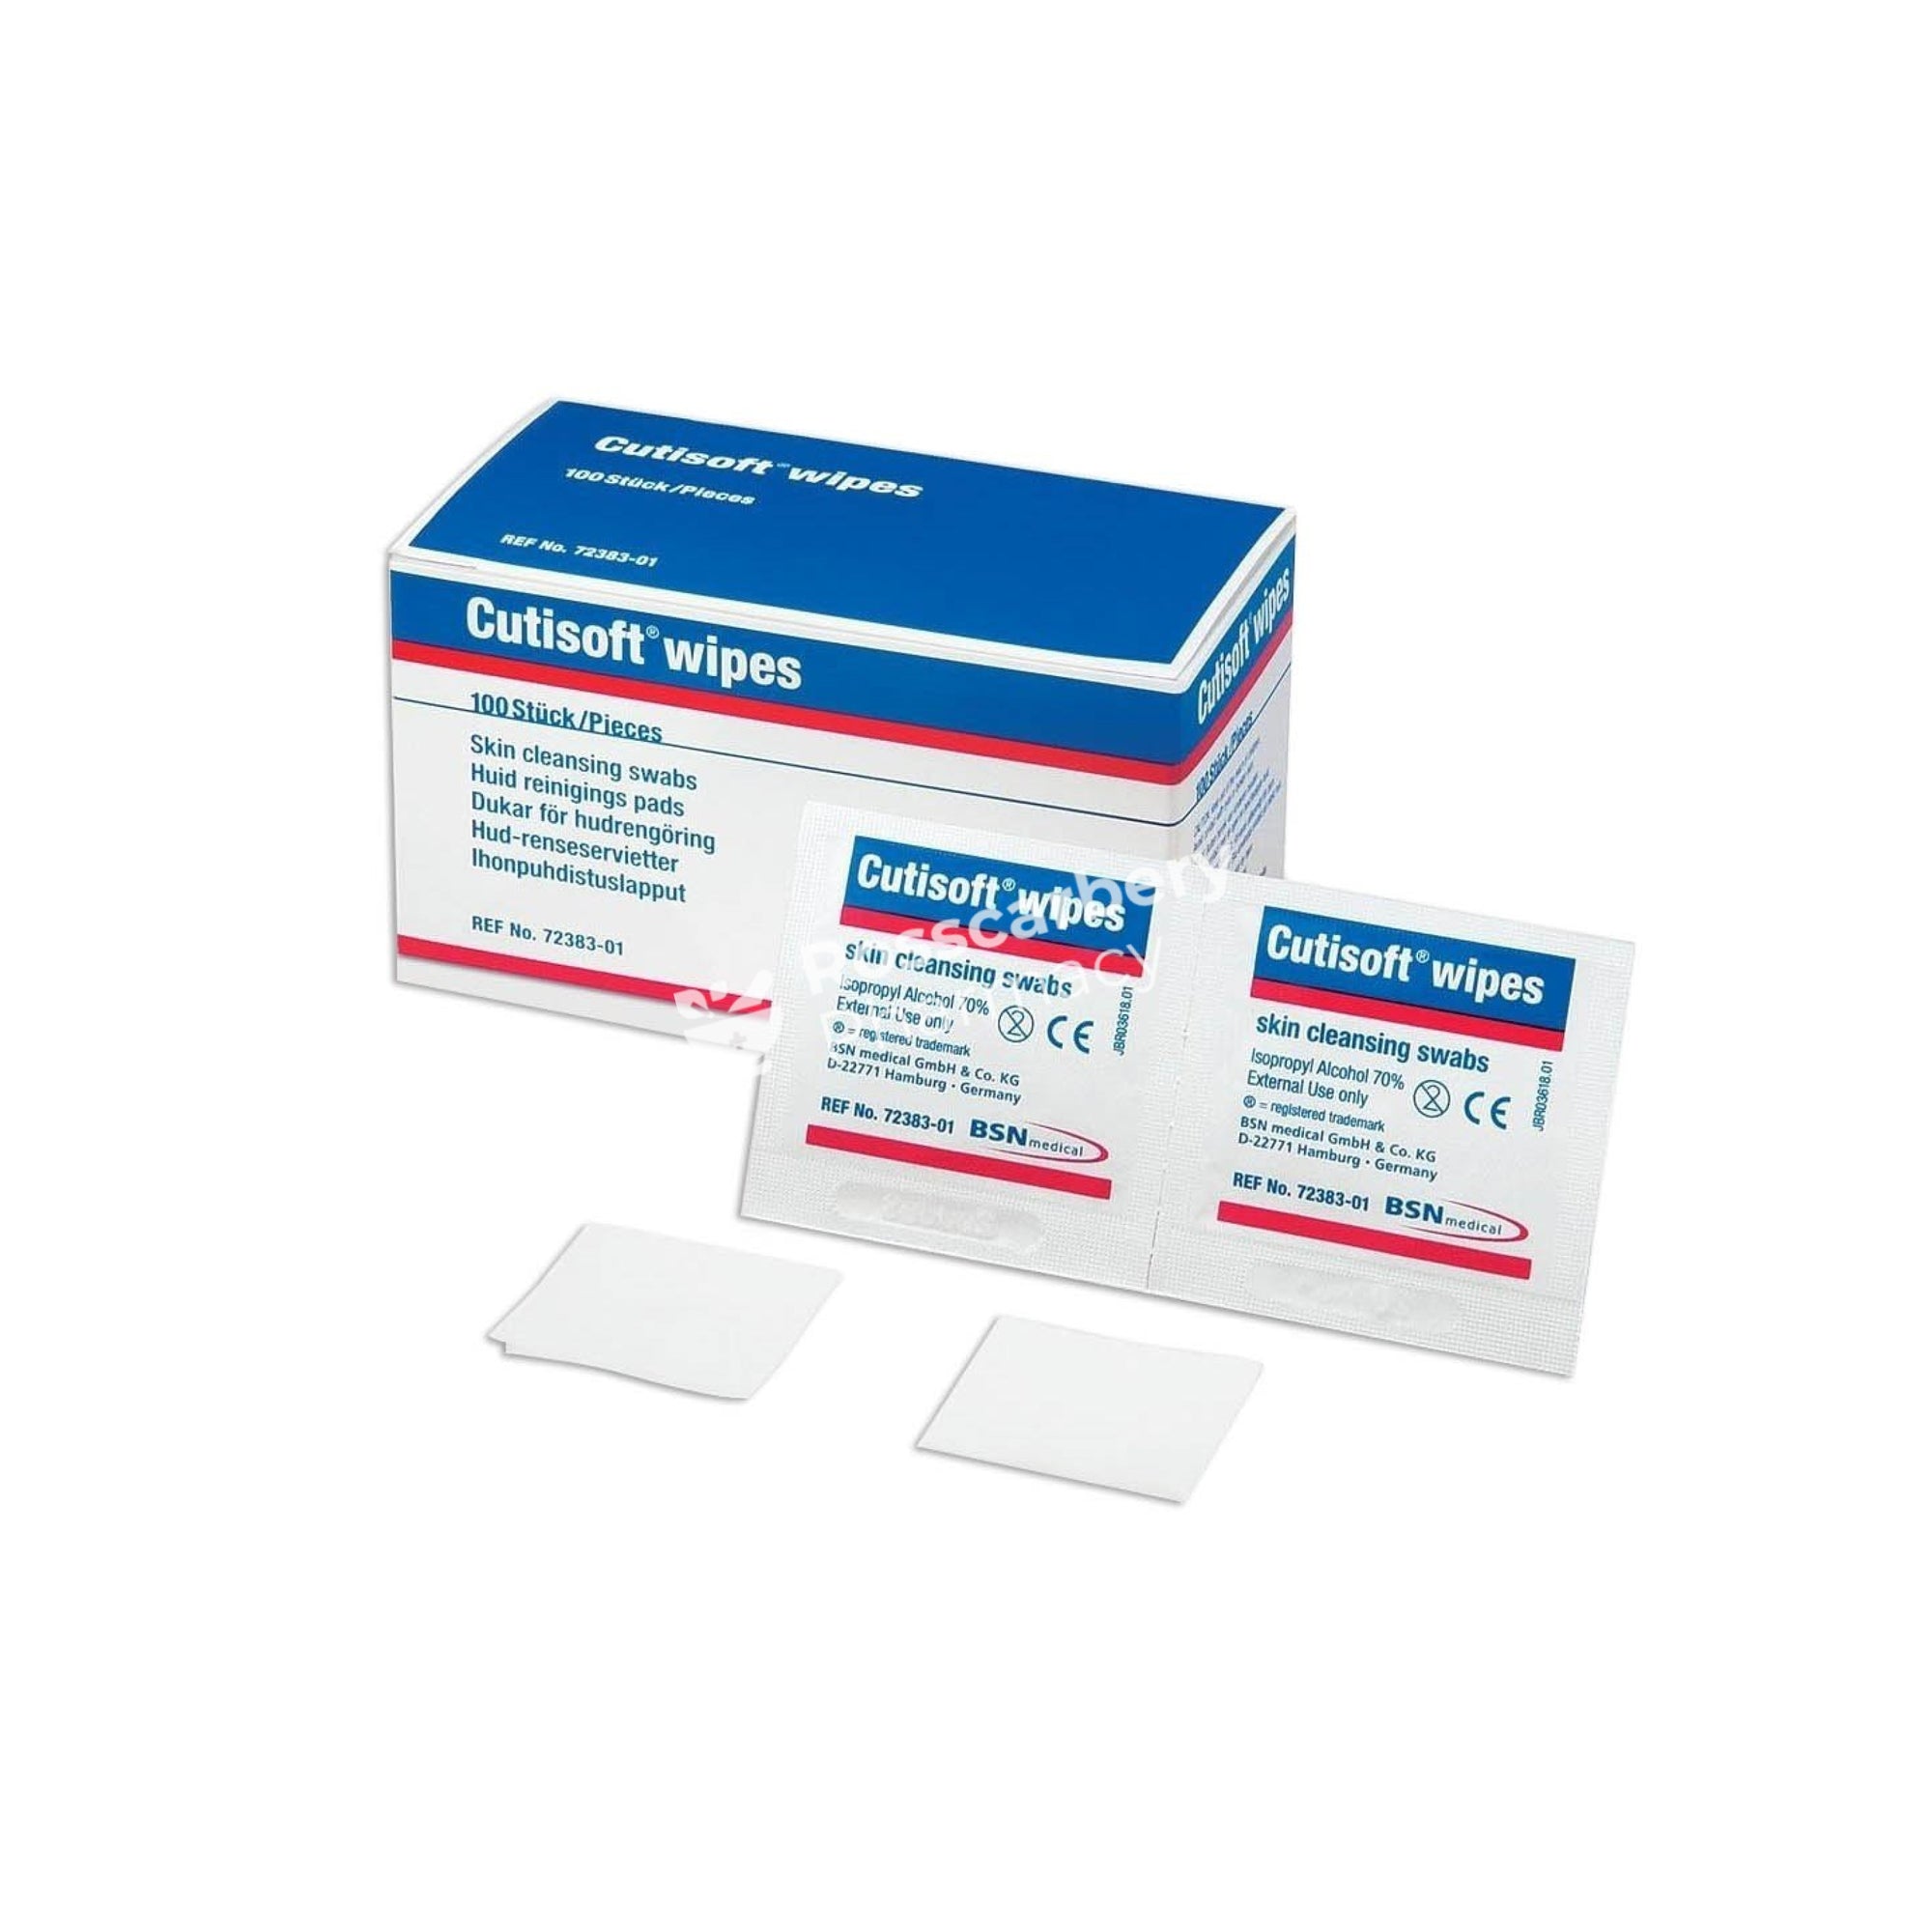 Cutisoft Wipes Antiseptic & Wound Healing